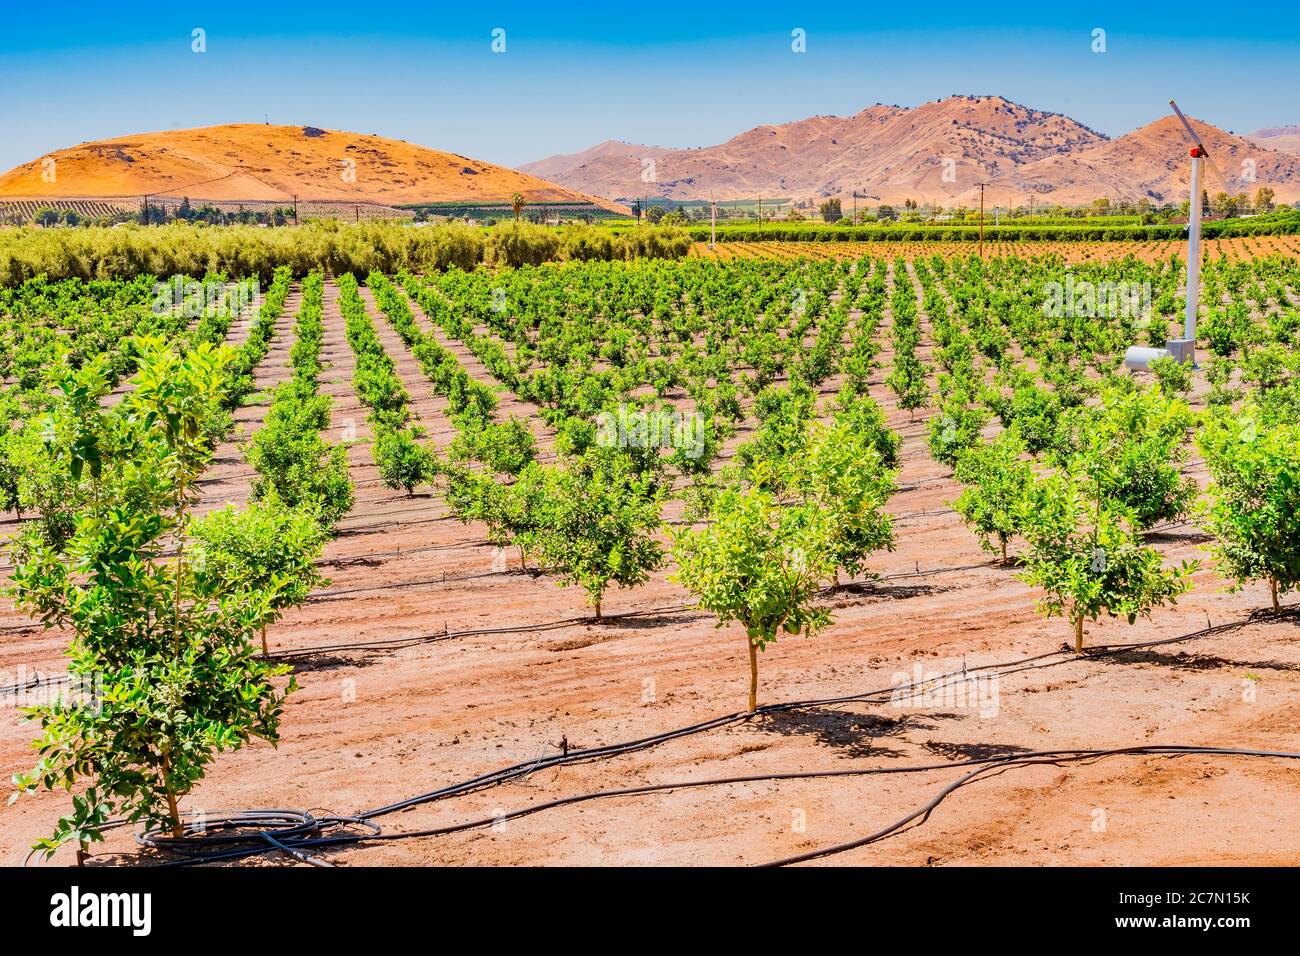 The San Joaquin Valley covers a huge part of Central California, and is the heart of  agriculture in California. Young orange trees grow in one of the Stock Photo